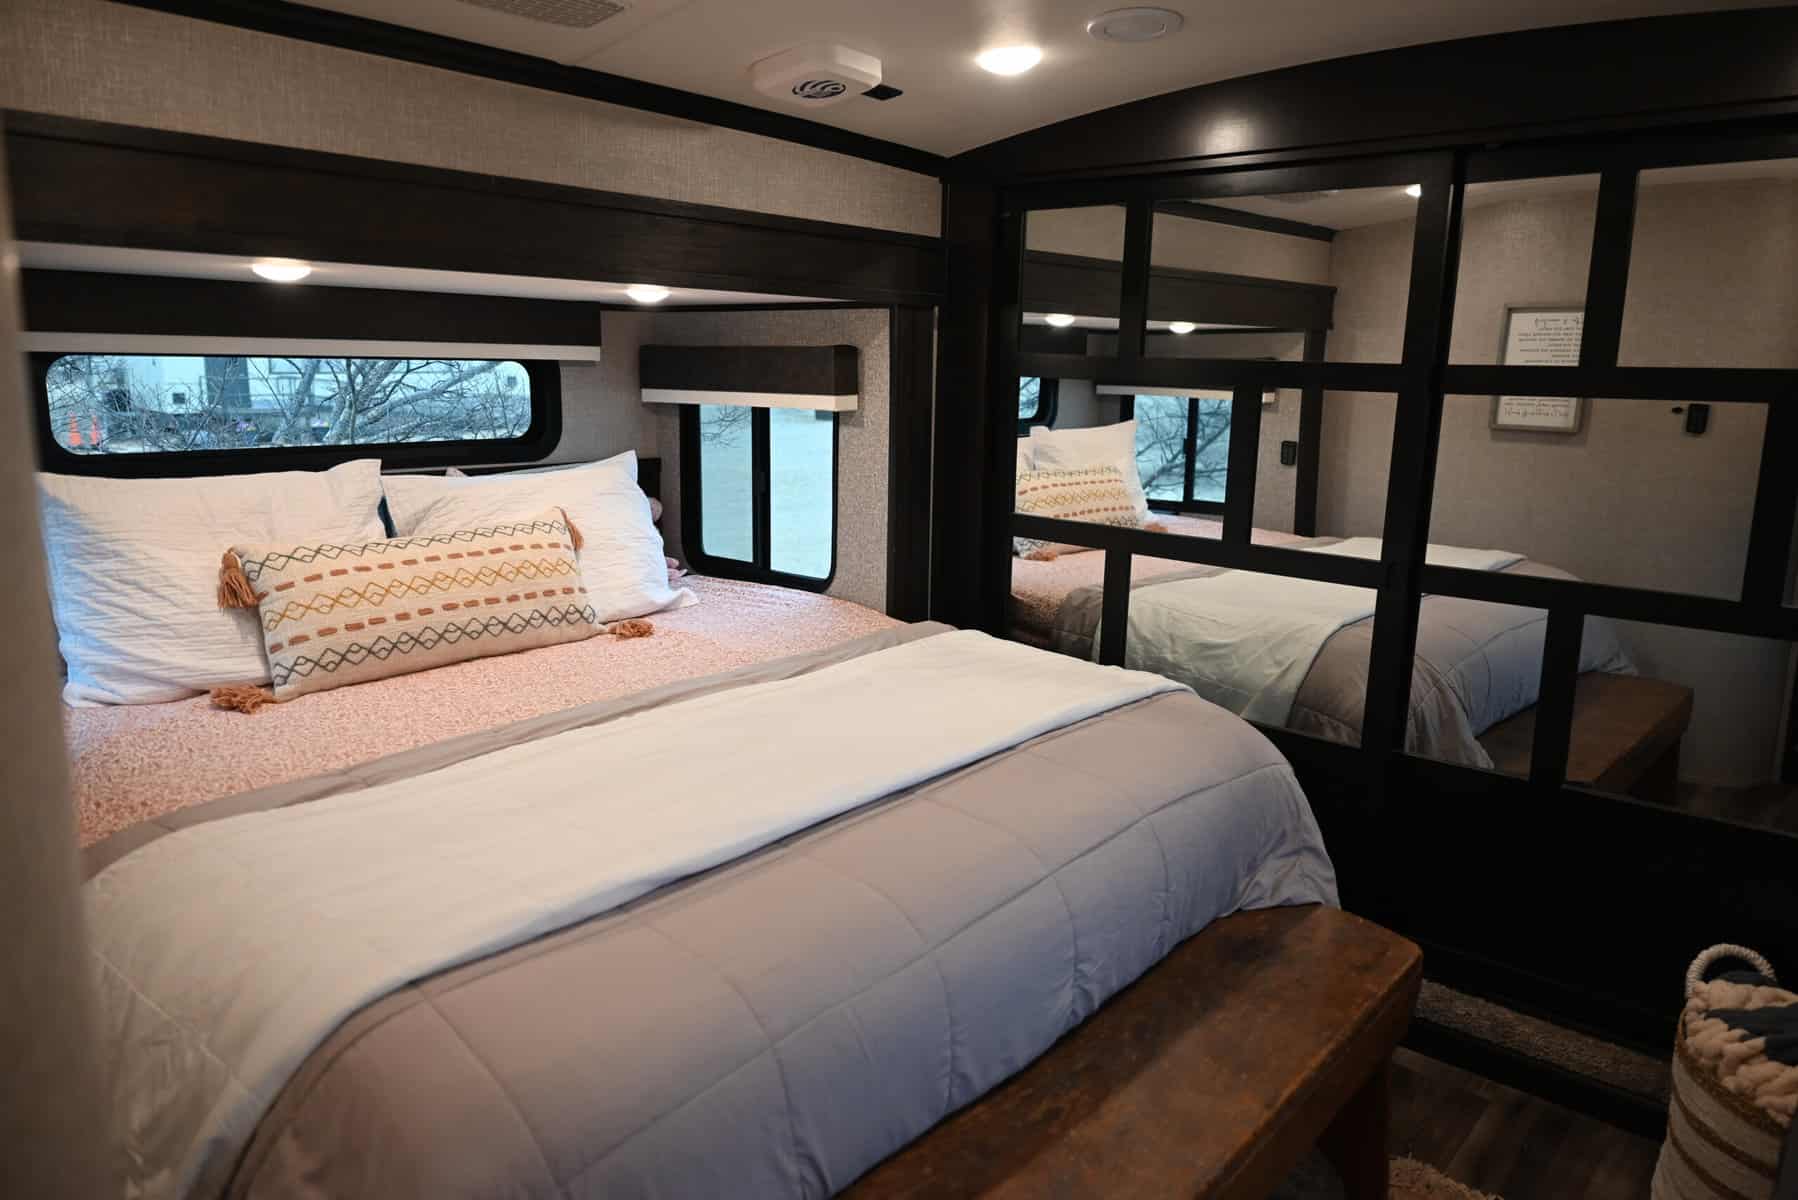 better sleep in RV bedroom with cozy bedding and shades